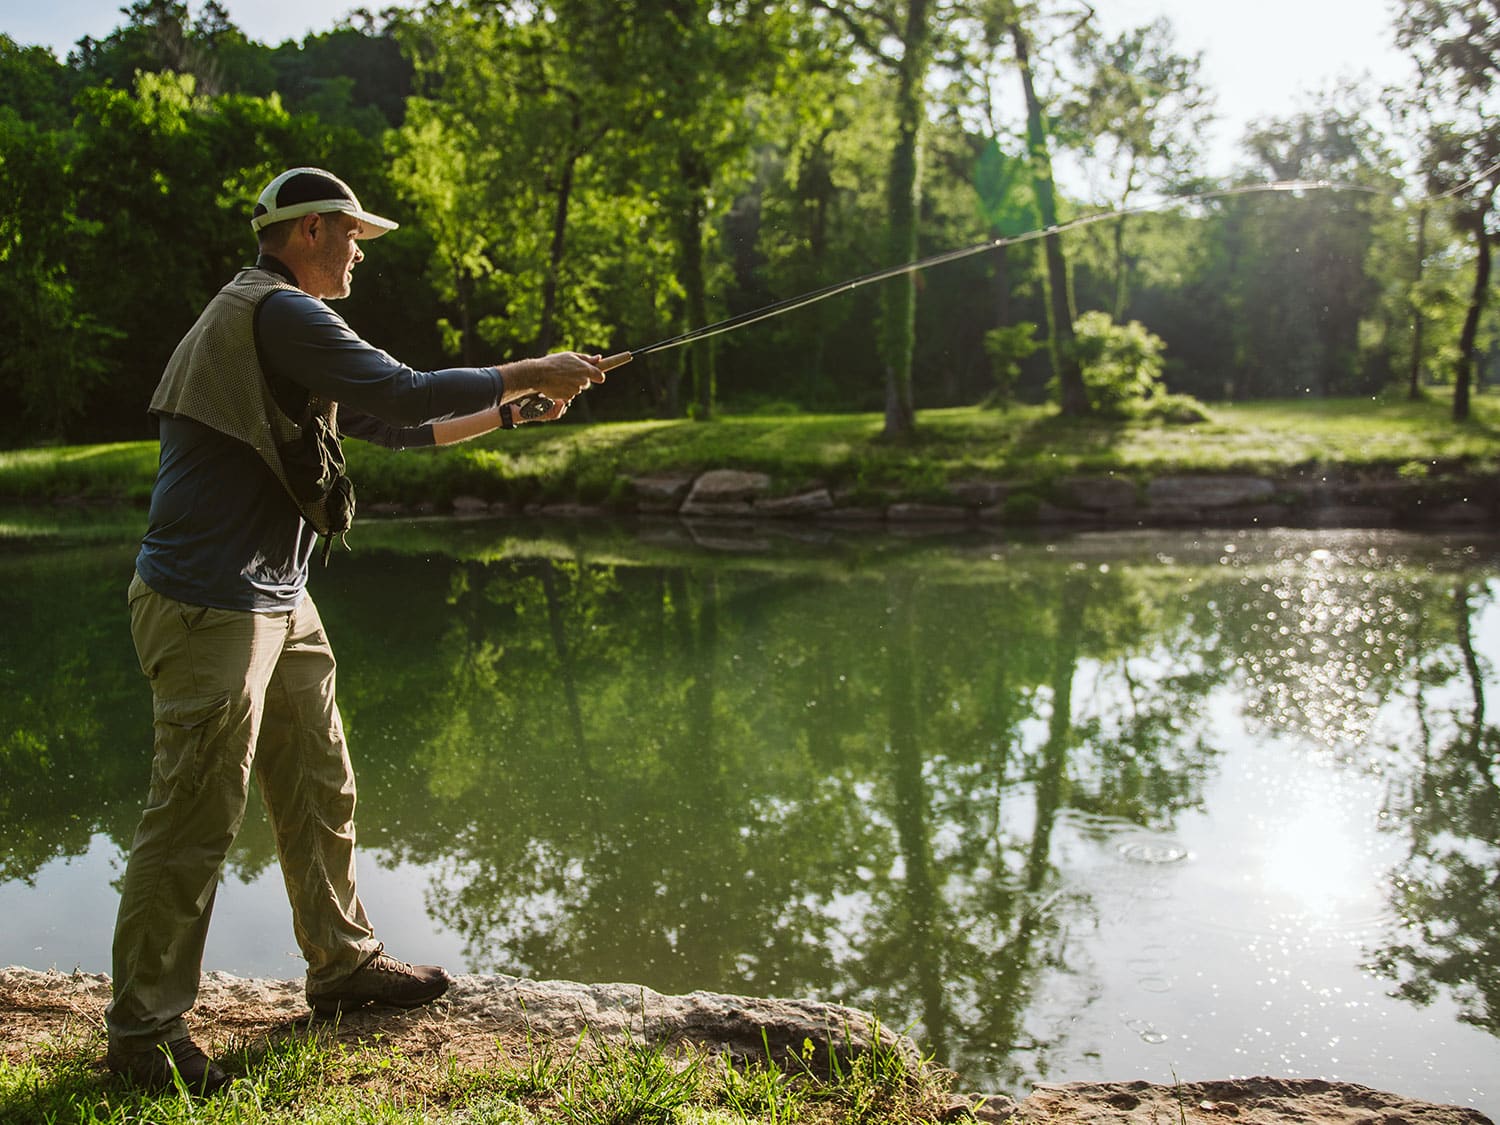 A fly fisherman leading lessons at Dogwood Canyon Nature Park in Missouri.